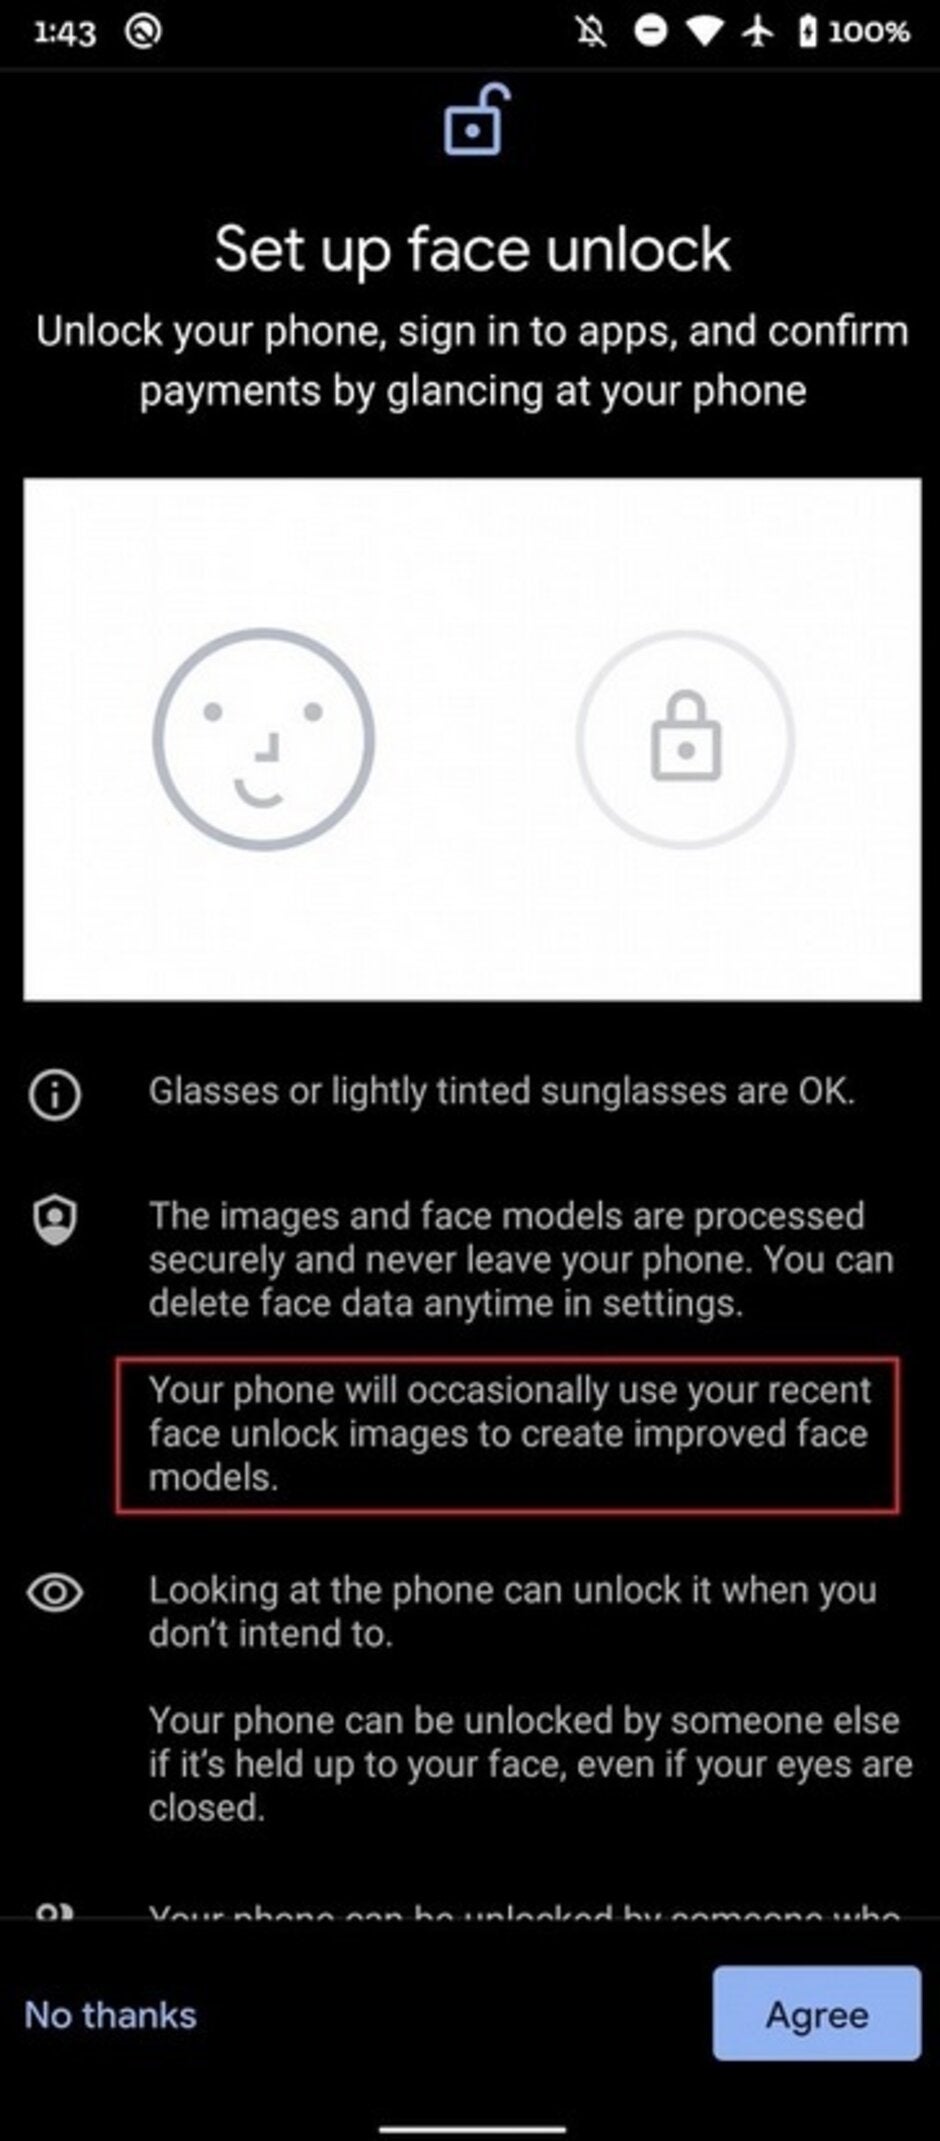 From time to time, Face Unlock will use recent images to improve its face models - Update brings some &quot;hidden&quot; changes to the Pixel 4 series